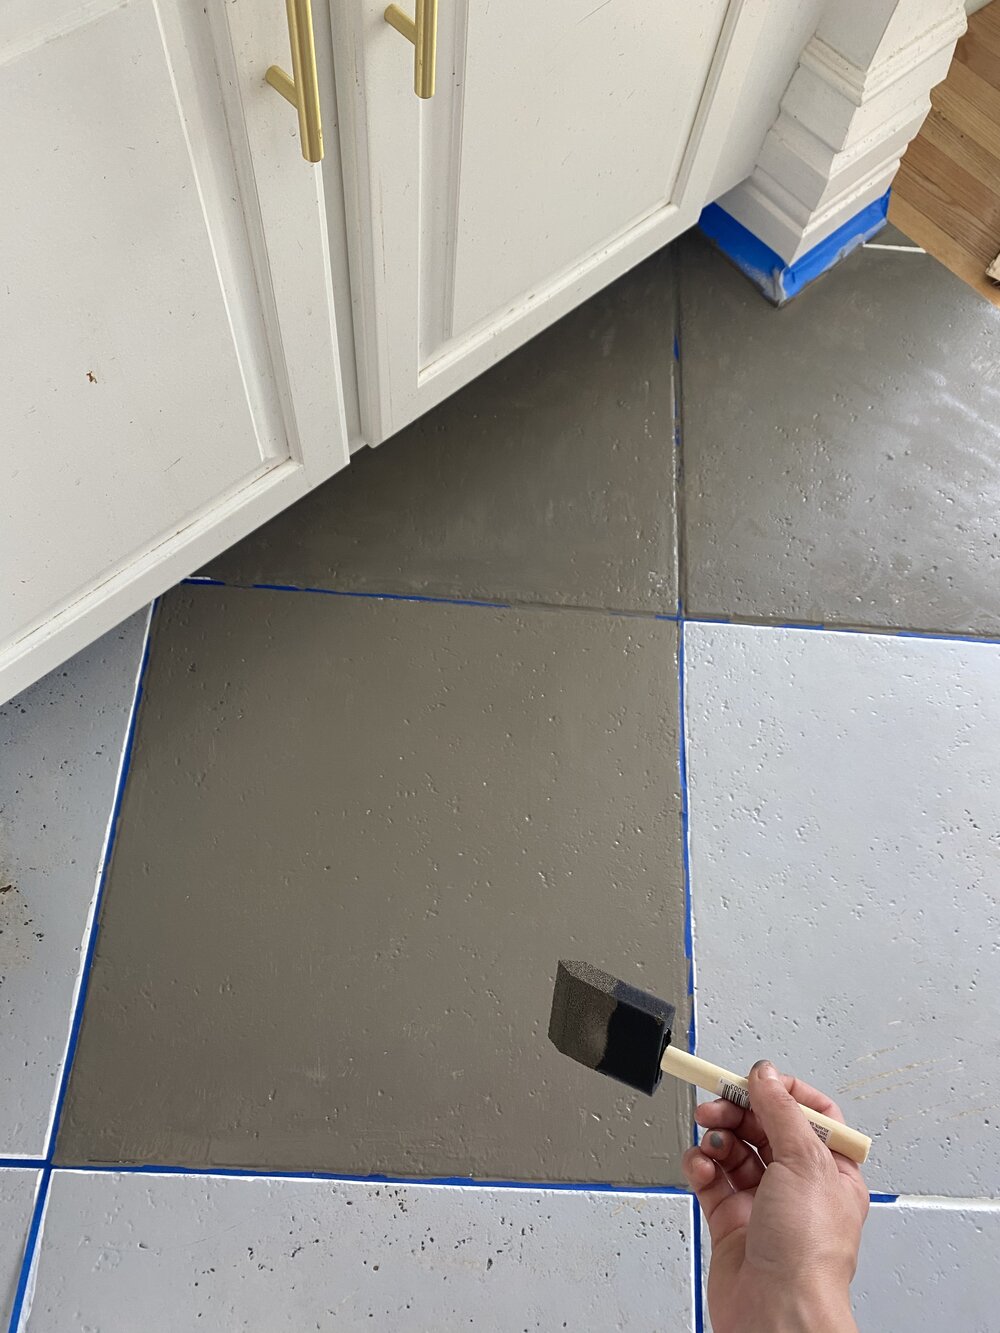 Faux Slate Floors Our Old Place, Can You Paint Ceramic Tile Floors To Look Like Slate